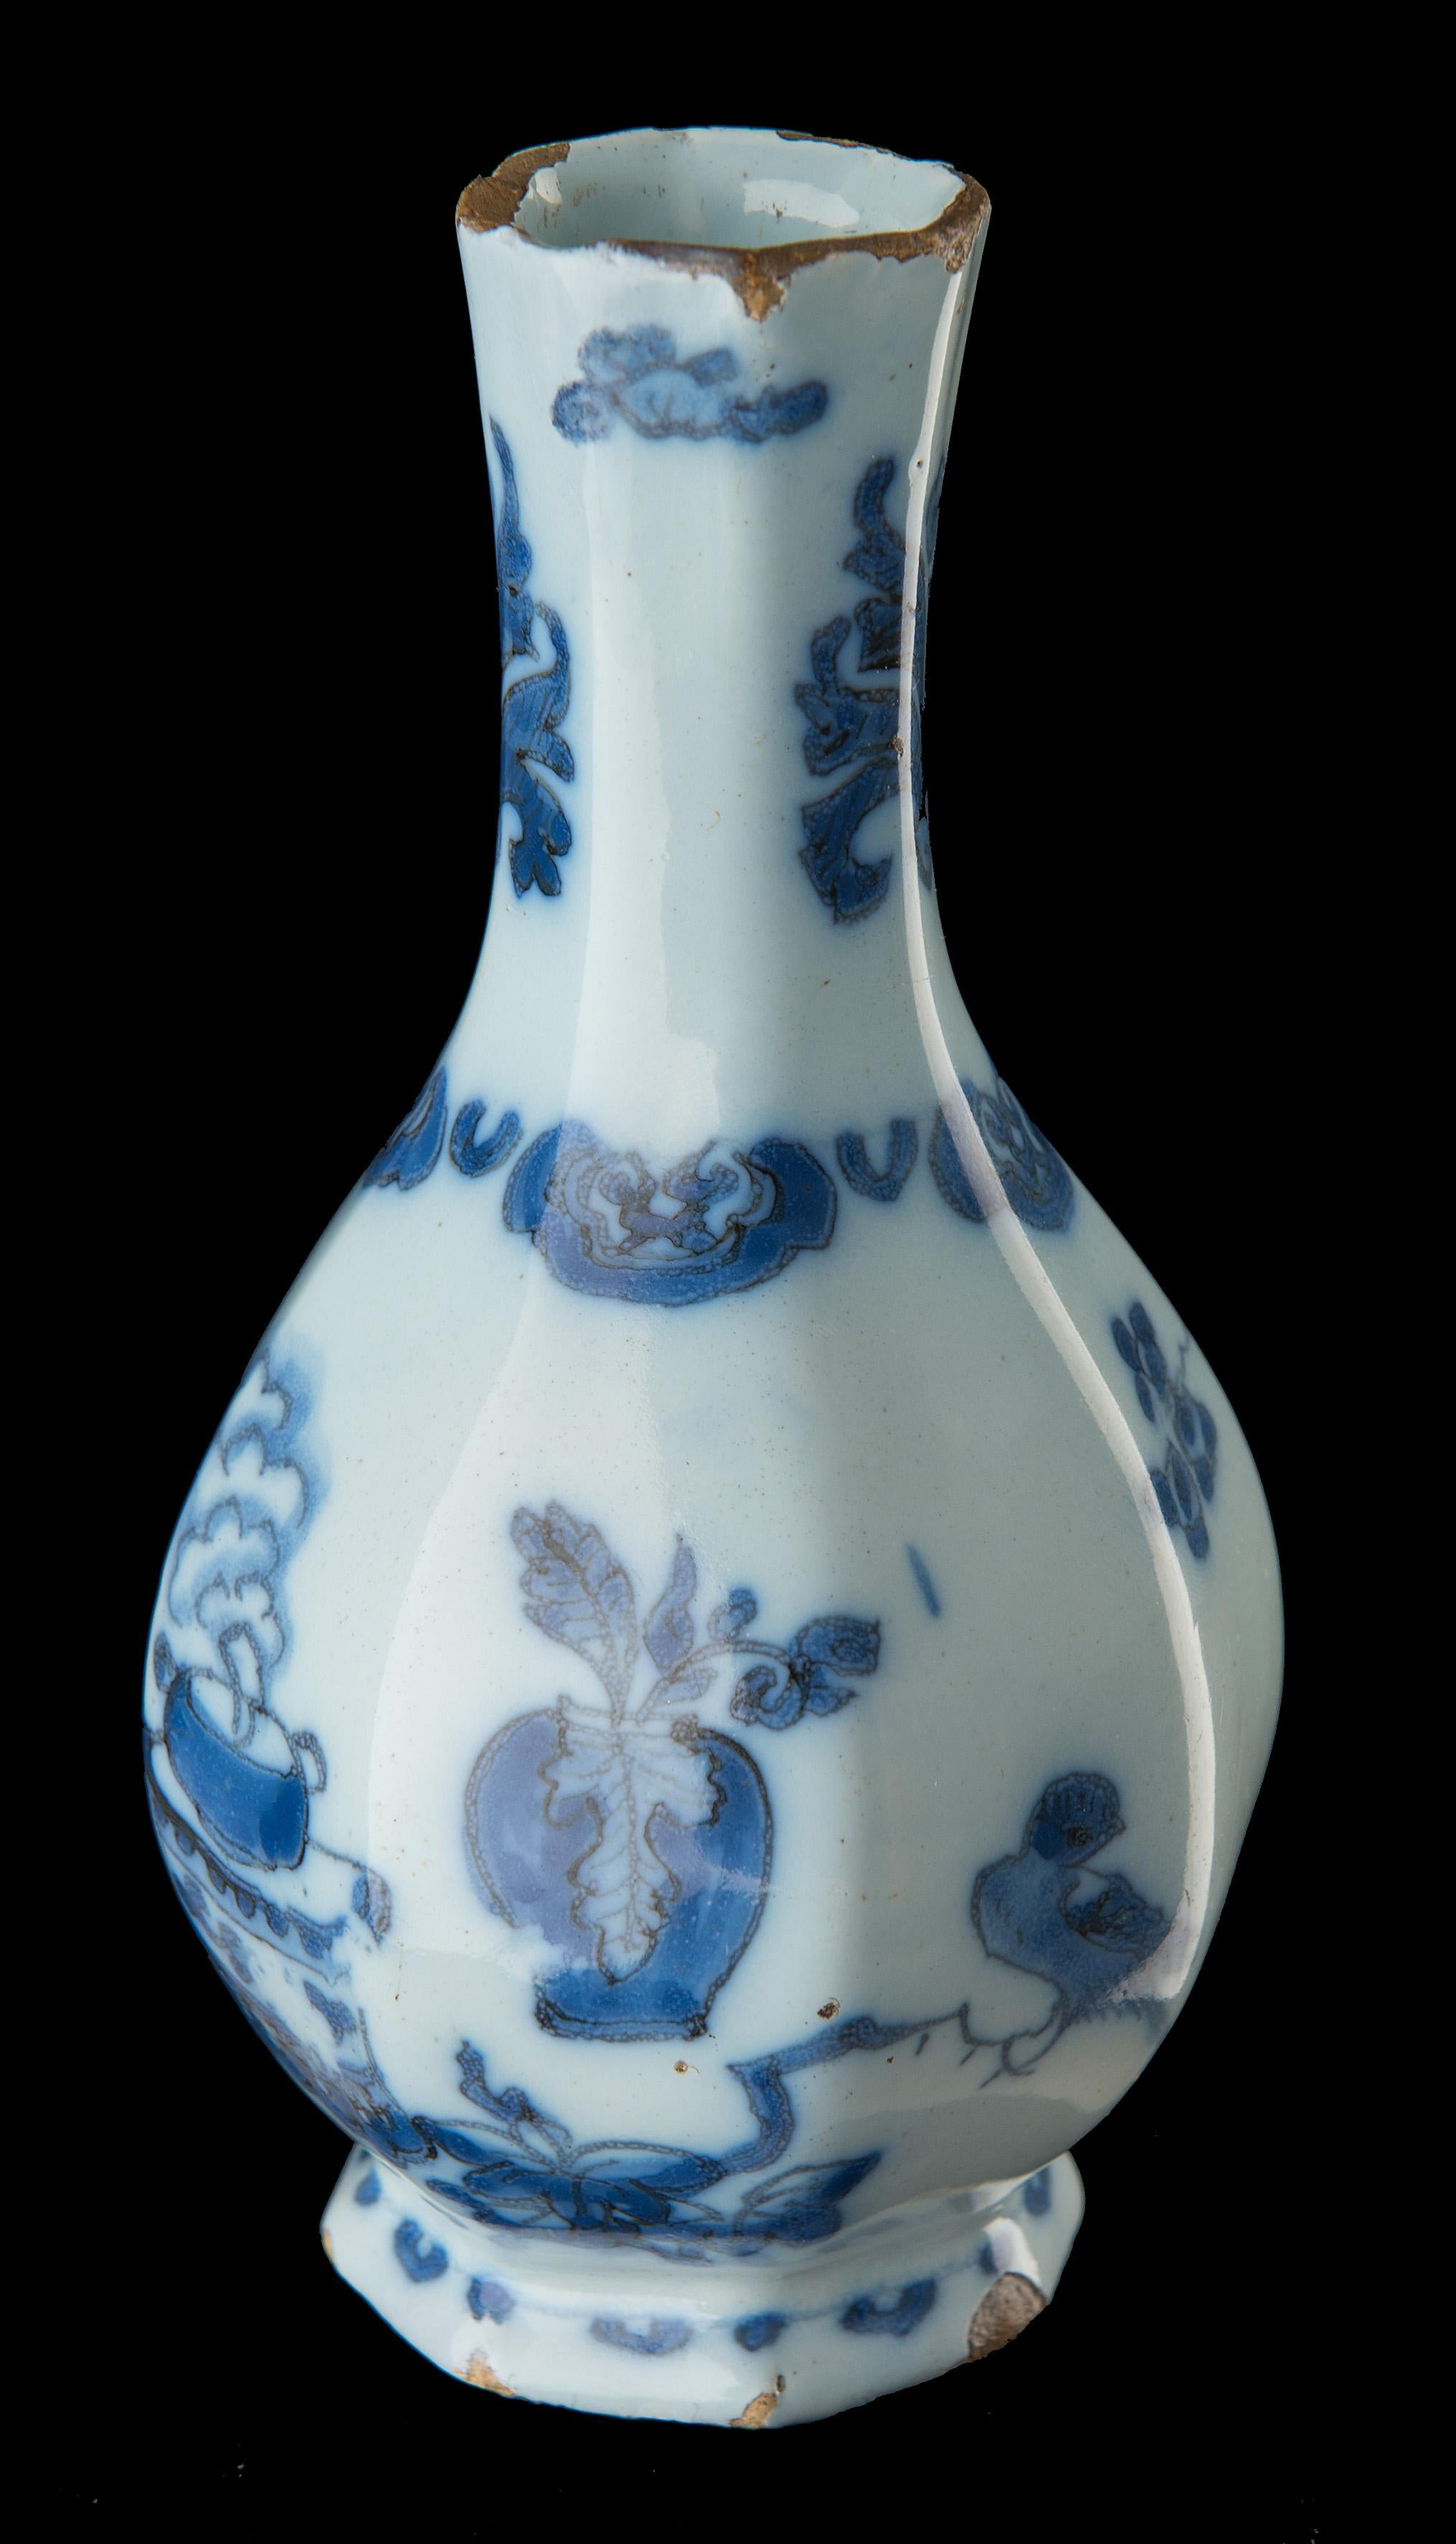 Blue and white chinoiserie bottle vase. Delft, circa 1685. 
The Metal Pot pottery. Mark: LC and 4, period of Lambertus Cleffius (1679-1691)

The bottle vase has an octagonal body with a flaring neck, standing on a waisted foot. The chinoiserie